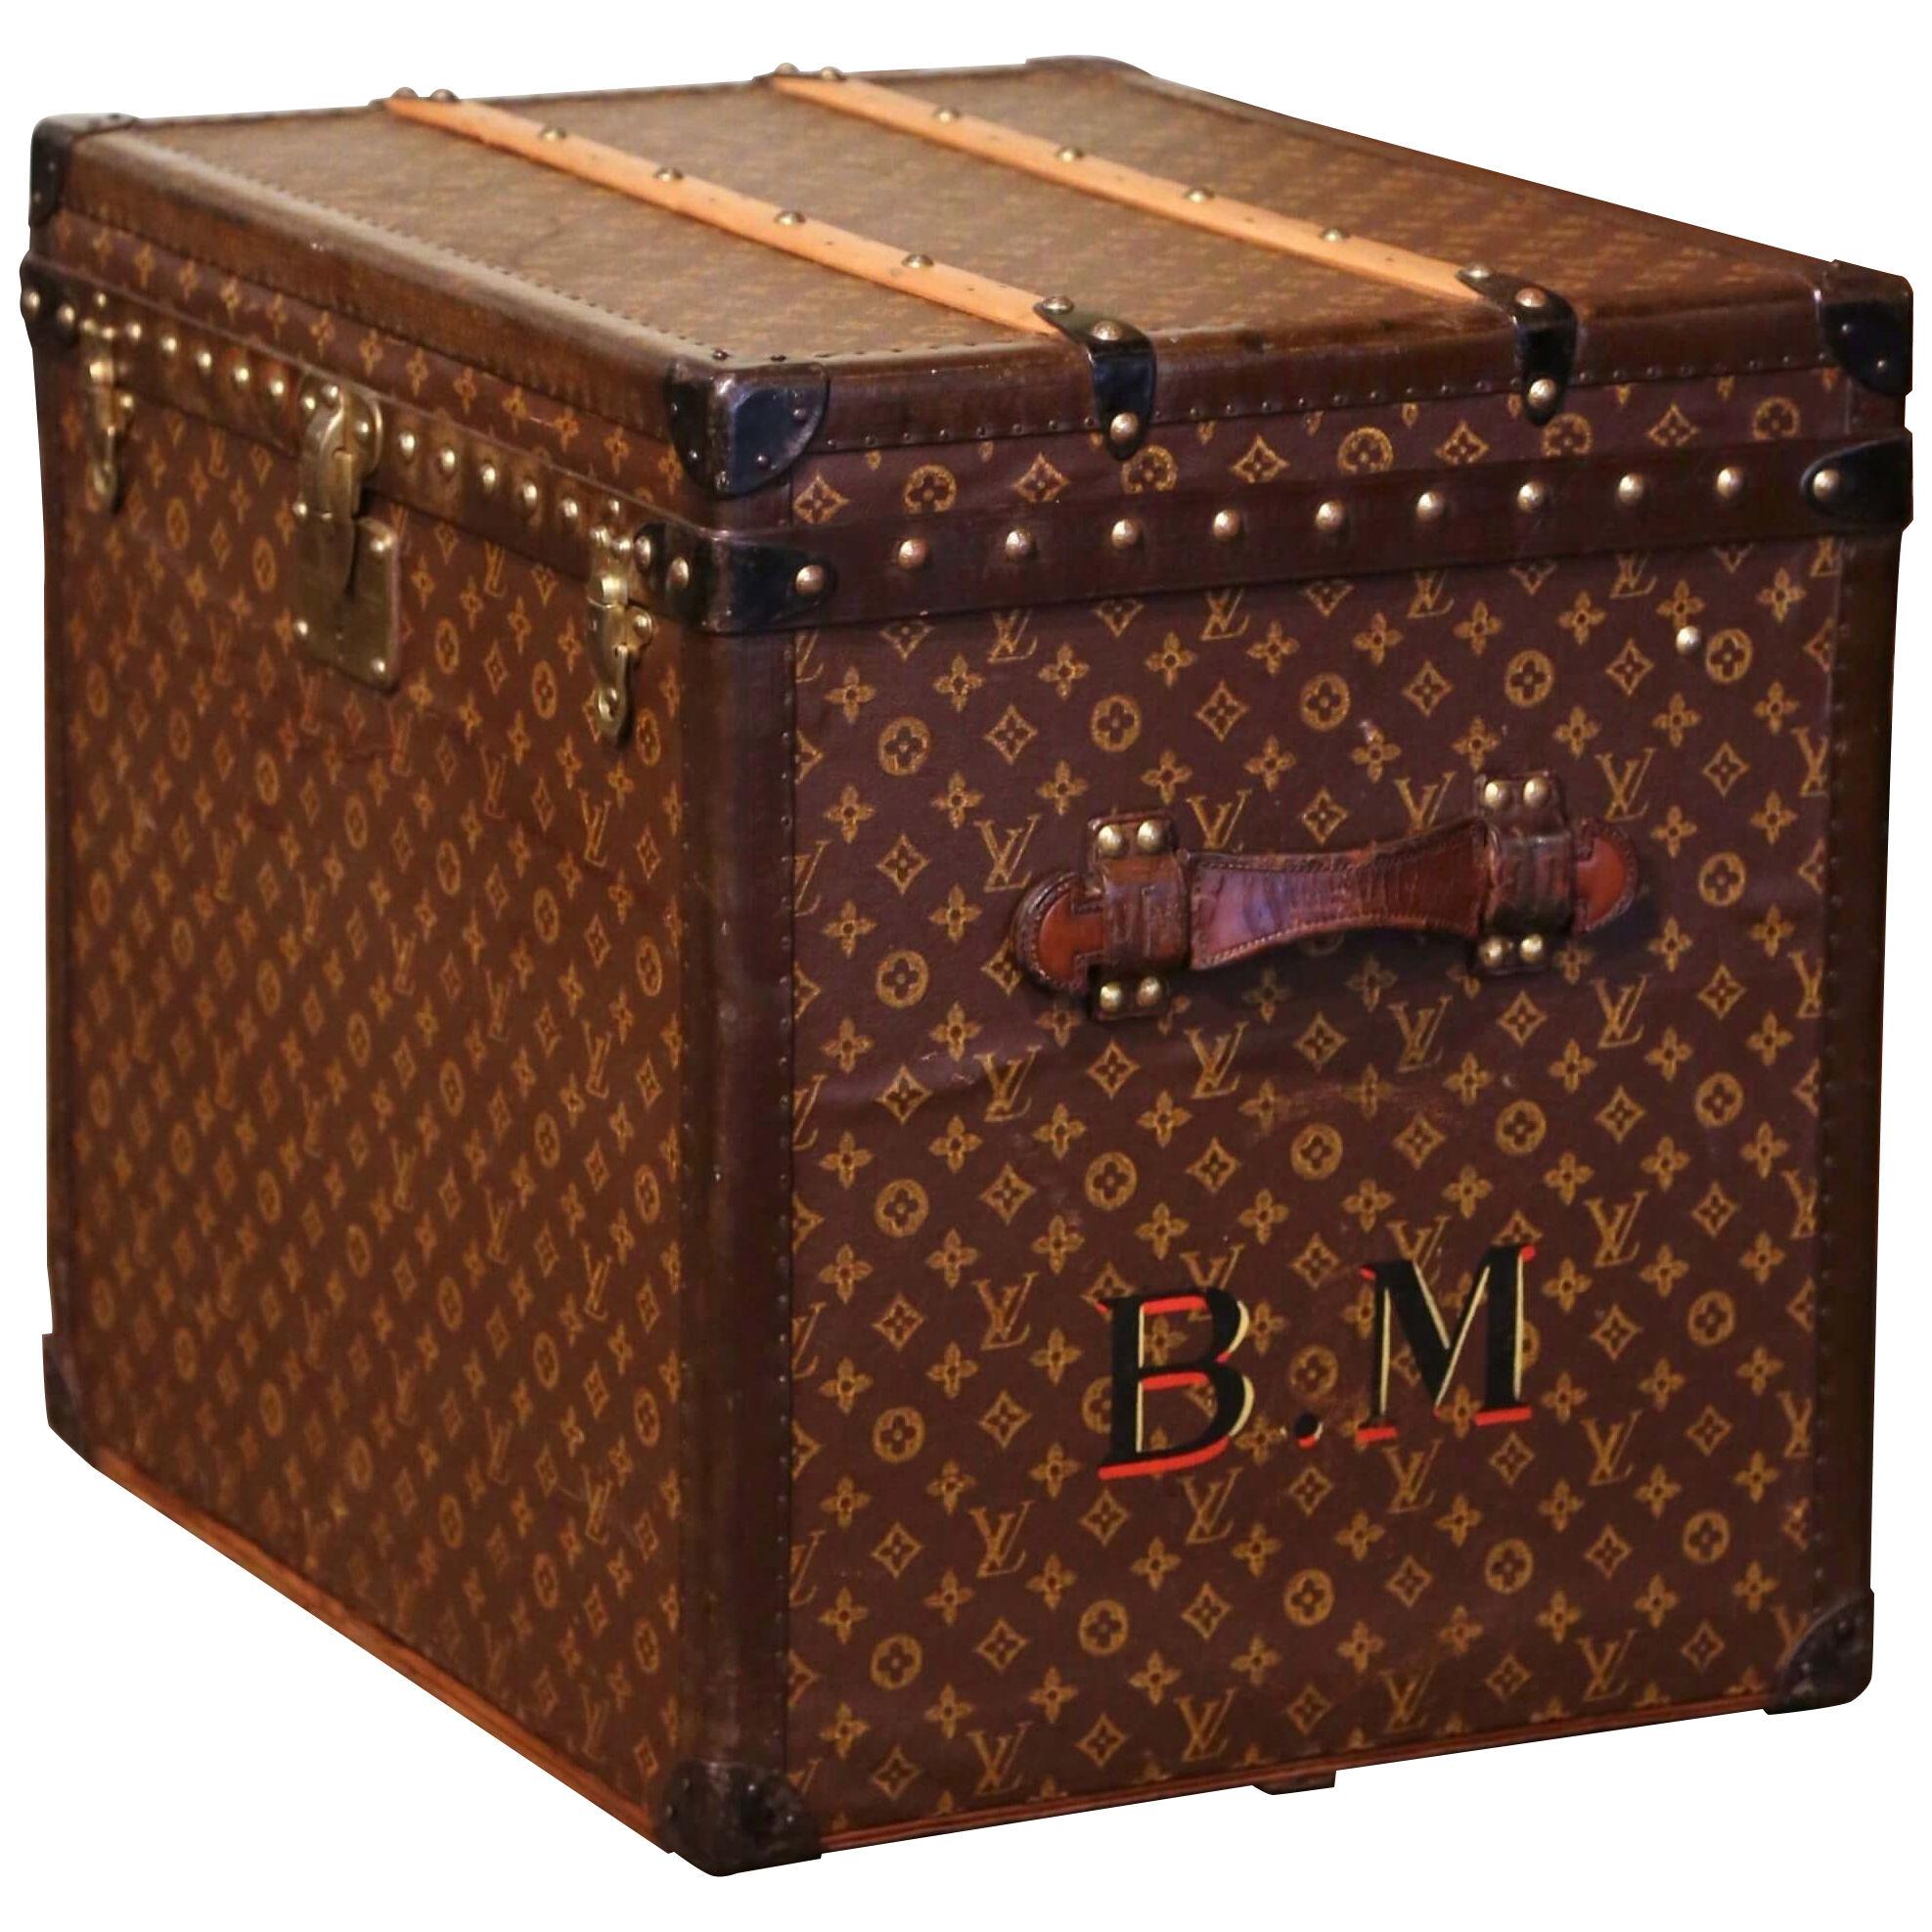 Early 20th Century French Stencil and Monogram Louis Vuitton Leather Hat Trunk